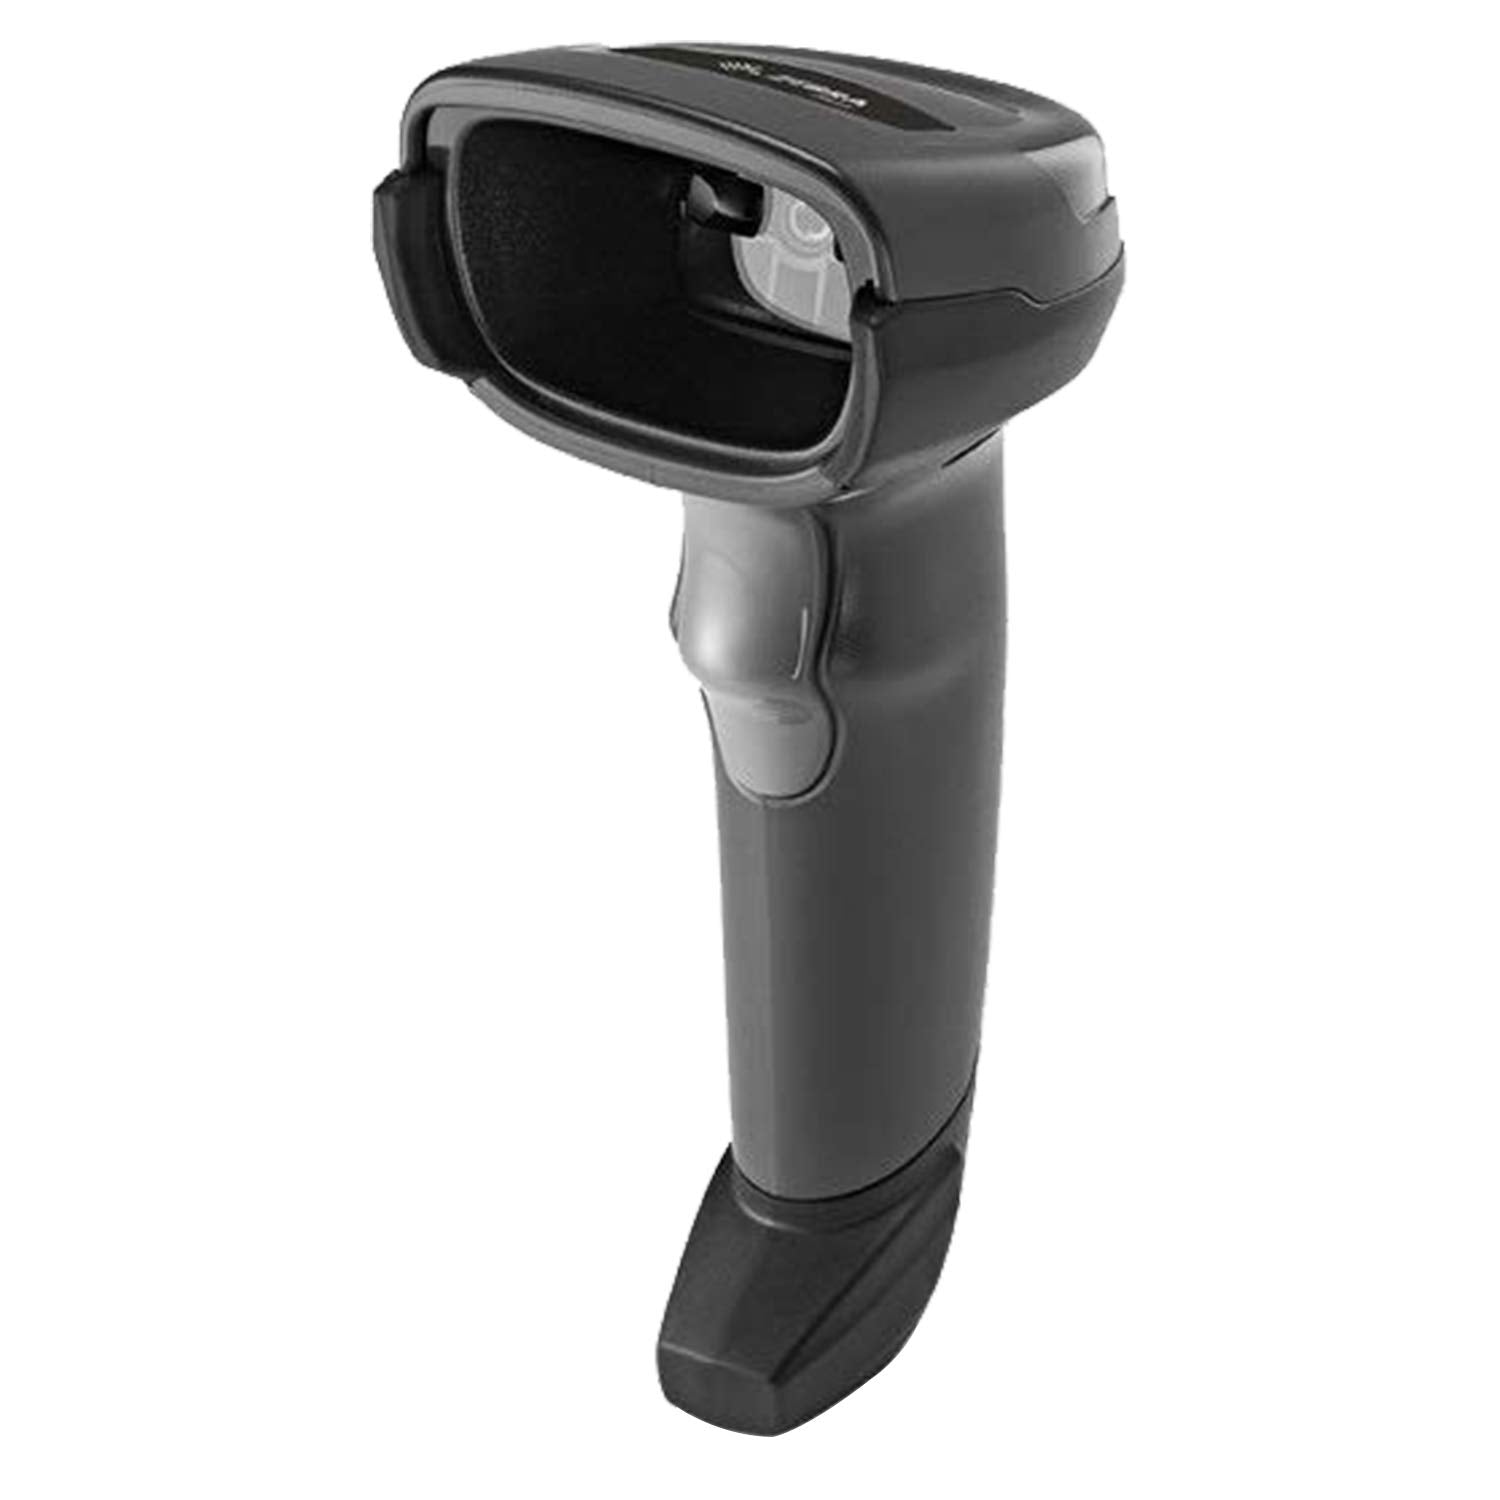 DS2208-SR7U2100AZK #Zebra DS2208 Scanner,USB,2D Barcode Reader (without stand) Price in Bangladesh